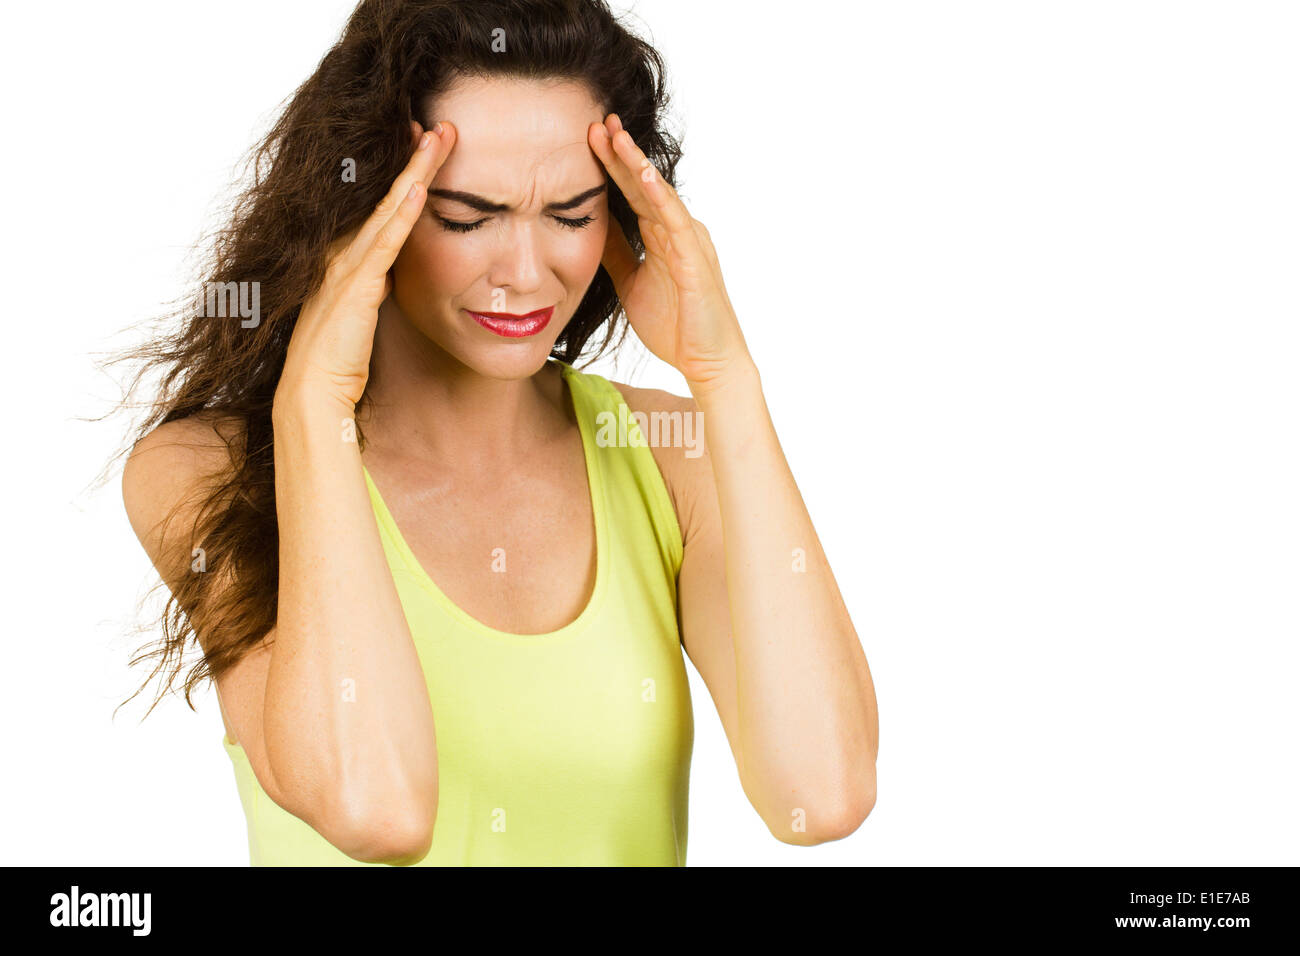 A woman suffering from a bad headache or migraine. Isolated on white. Stock Photo